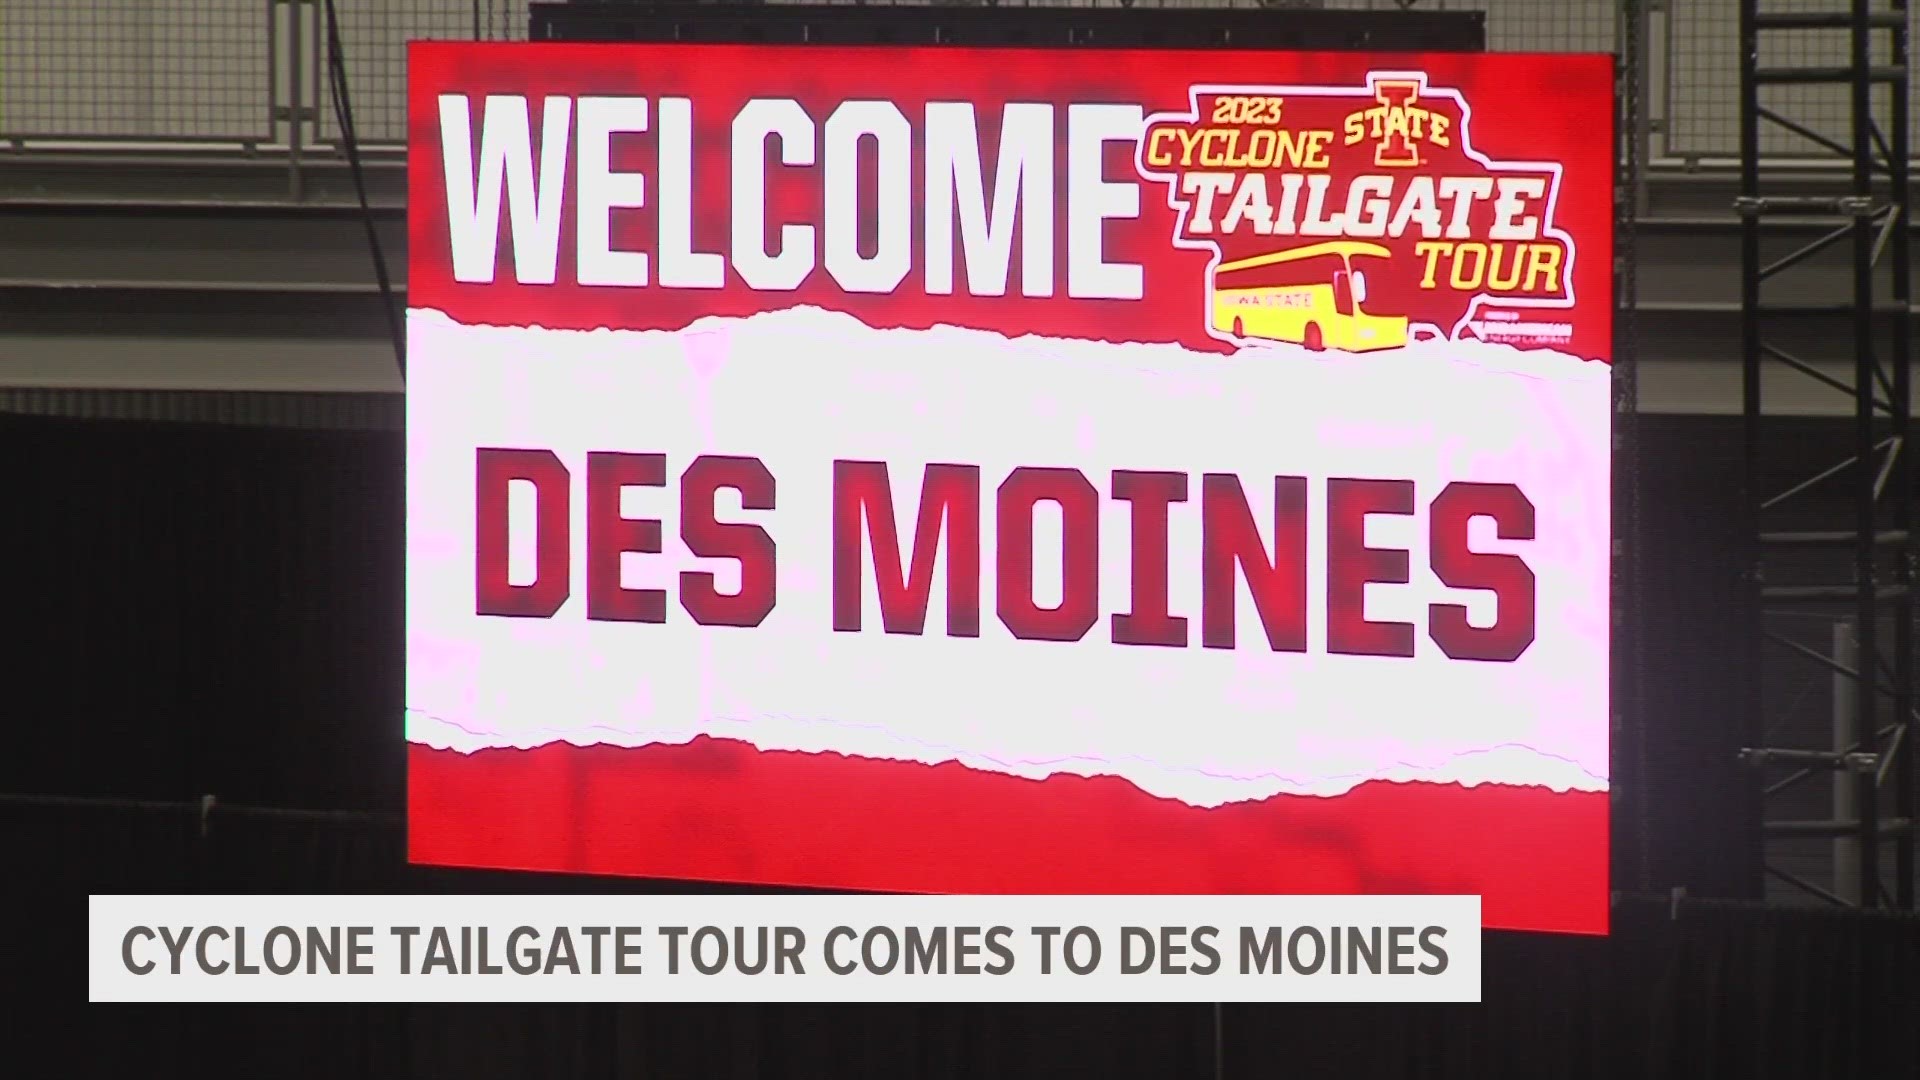 After visiting almost a dozen cities across Iowa, Iowa State wrapped up its Cyclone Tailgate Tour in Des Moines.